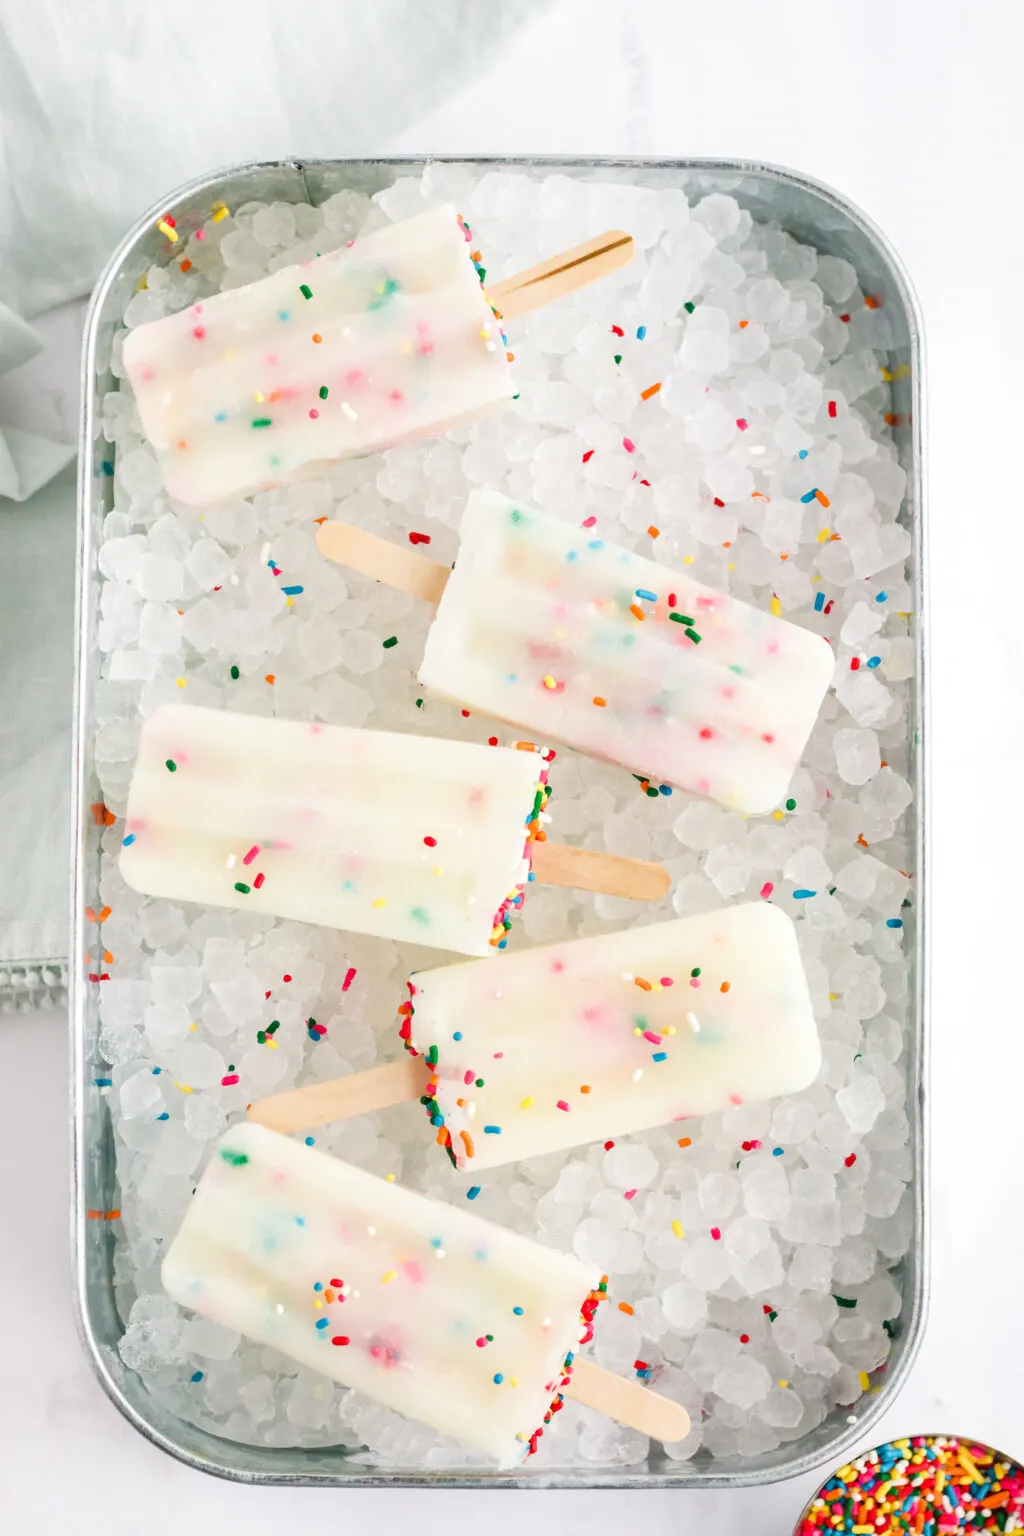 funfetti cake mix popsicles on tray of ice